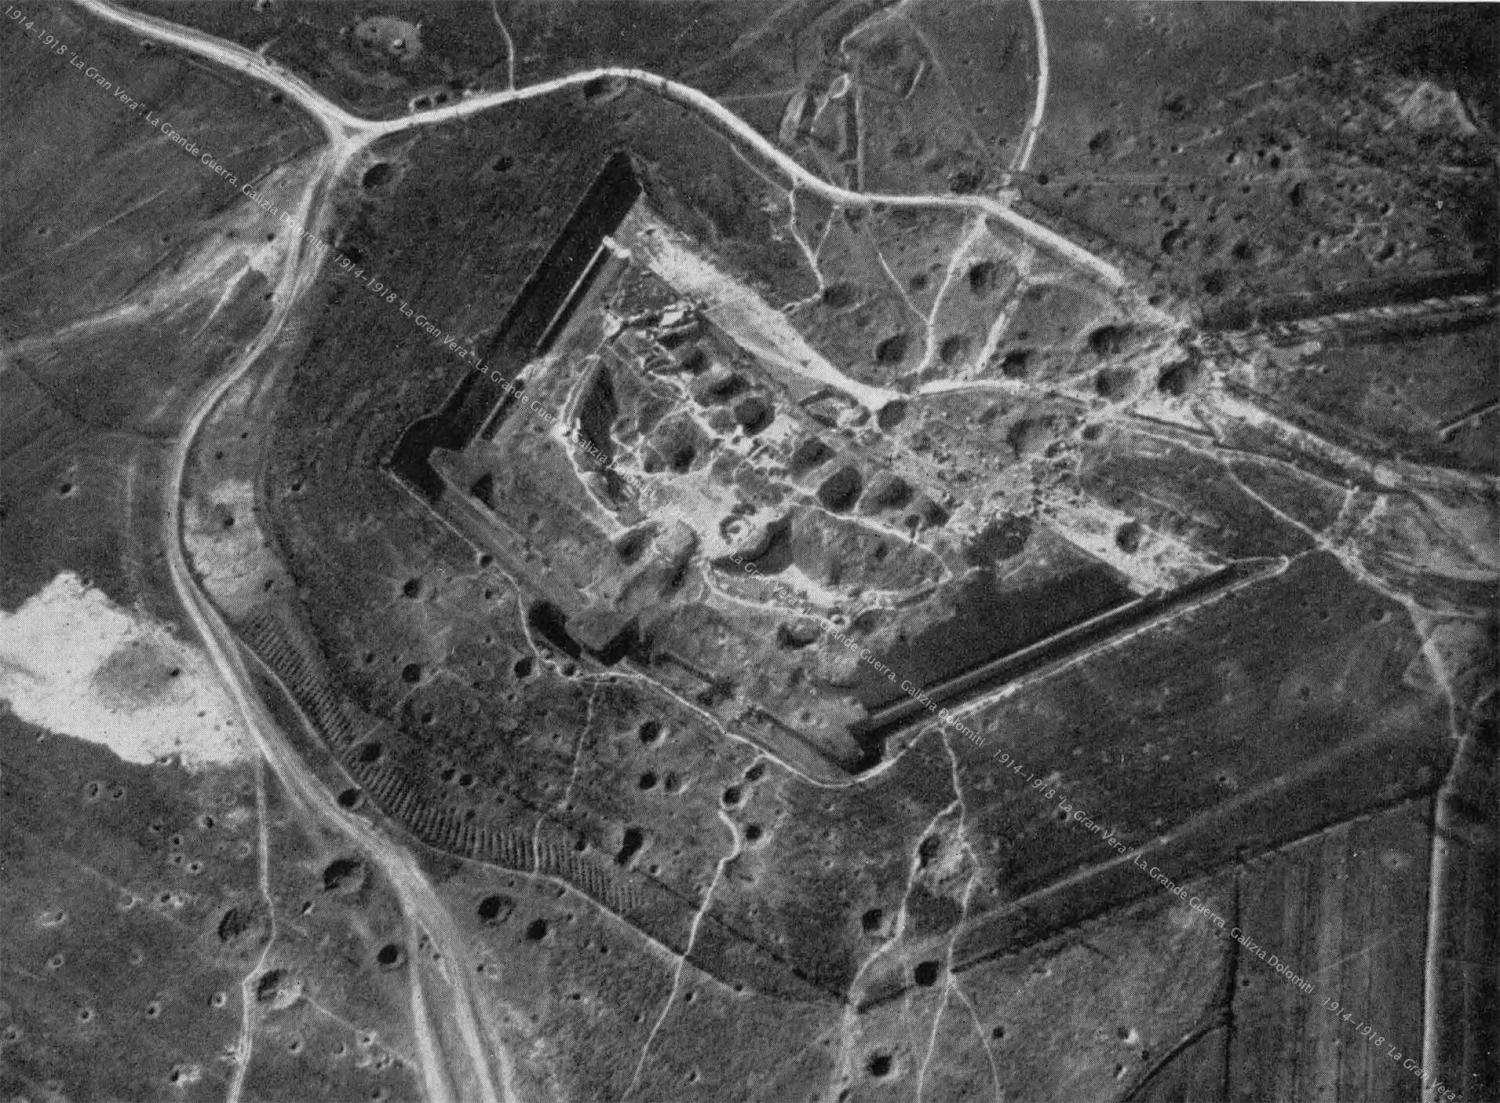 The Von Salis fort at Przemysl photographed by Austrian Air Force